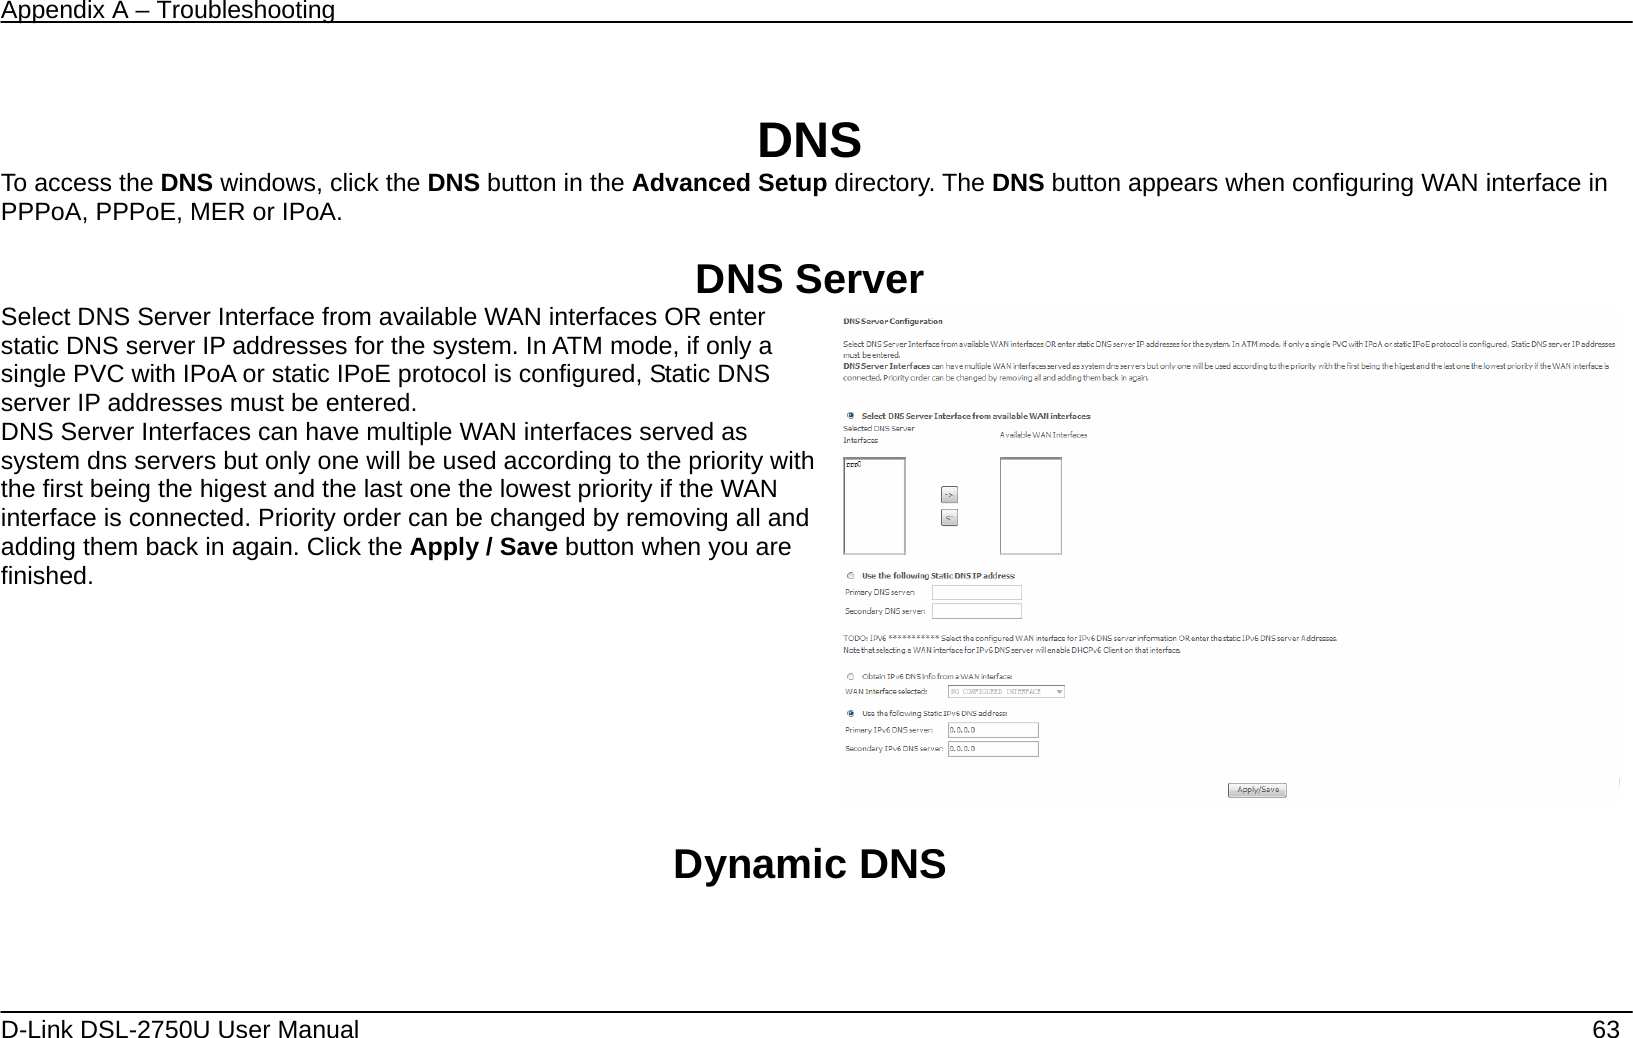 Appendix A – Troubleshooting   D-Link DSL-2750U User Manual    63  DNS To access the DNS windows, click the DNS button in the Advanced Setup directory. The DNS button appears when configuring WAN interface in PPPoA, PPPoE, MER or IPoA.  DNS Server Select DNS Server Interface from available WAN interfaces OR enter static DNS server IP addresses for the system. In ATM mode, if only a single PVC with IPoA or static IPoE protocol is configured, Static DNS server IP addresses must be entered. DNS Server Interfaces can have multiple WAN interfaces served as system dns servers but only one will be used according to the priority with the first being the higest and the last one the lowest priority if the WAN interface is connected. Priority order can be changed by removing all and adding them back in again. Click the Apply / Save button when you are finished.     Dynamic DNS 